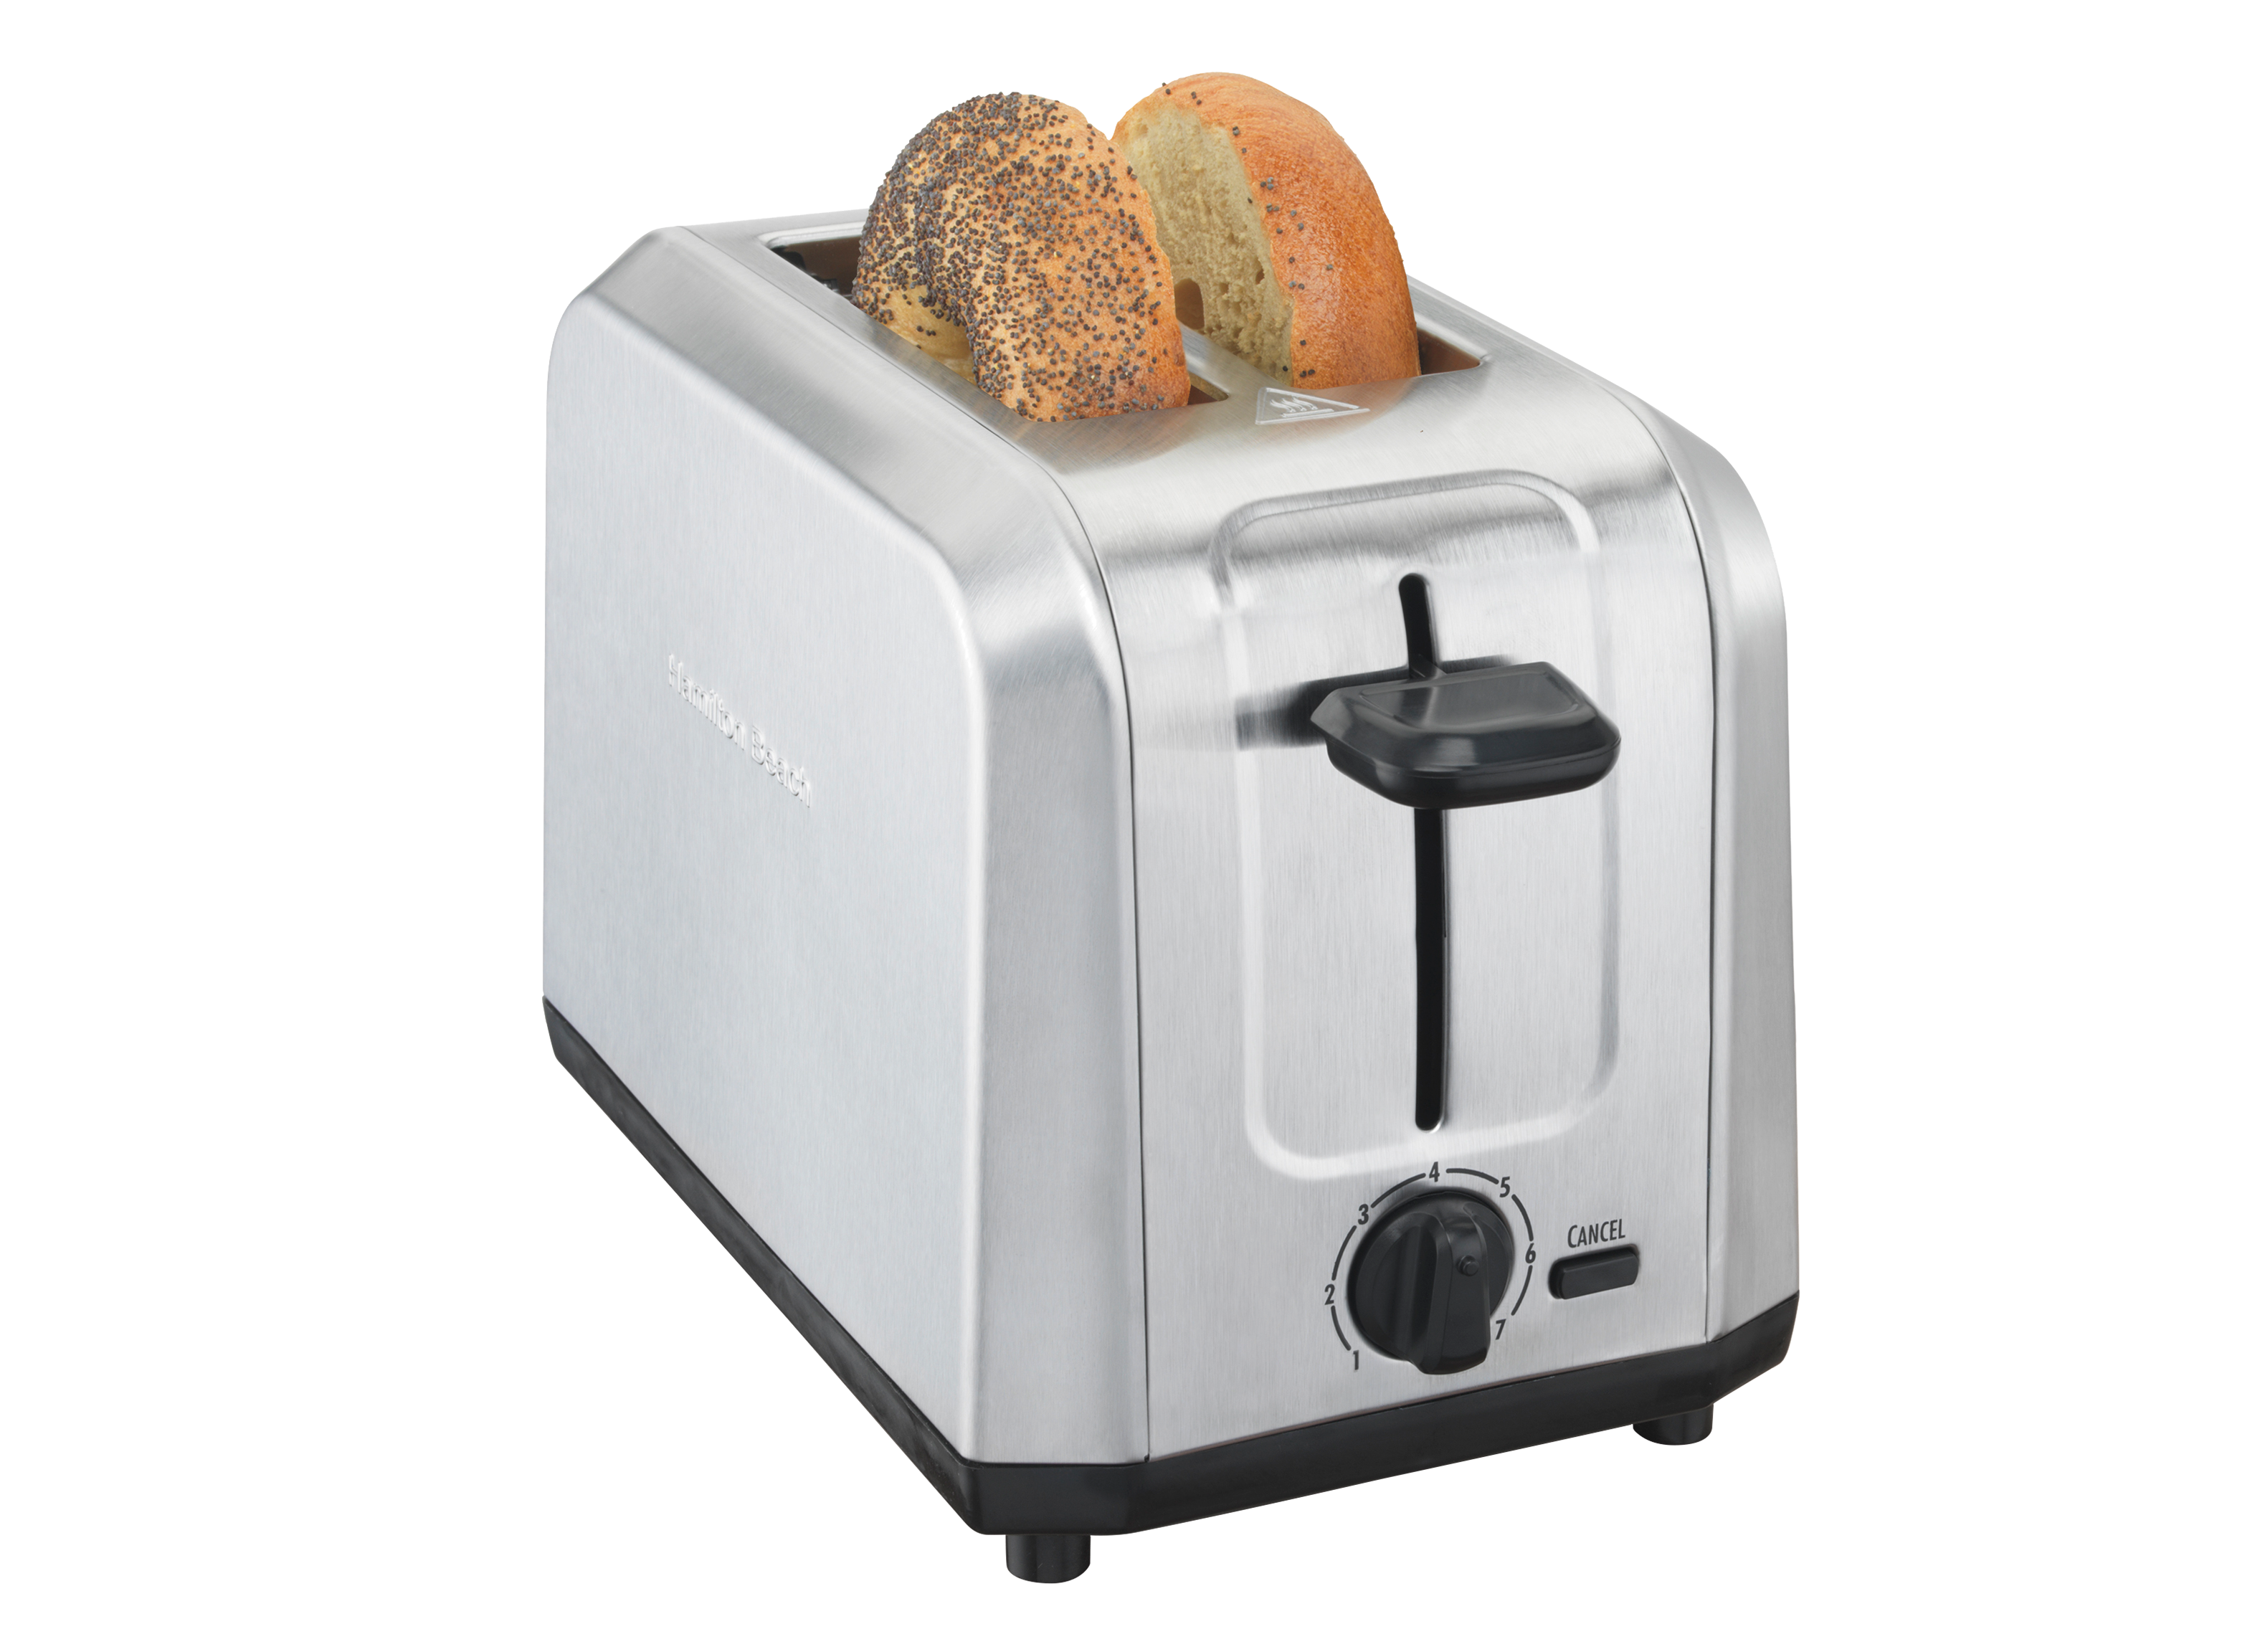 https://crdms.images.consumerreports.org/prod/products/cr/models/395986-toasters-hamilton-beach-2-slice-22910-stainless-steel-62095.png